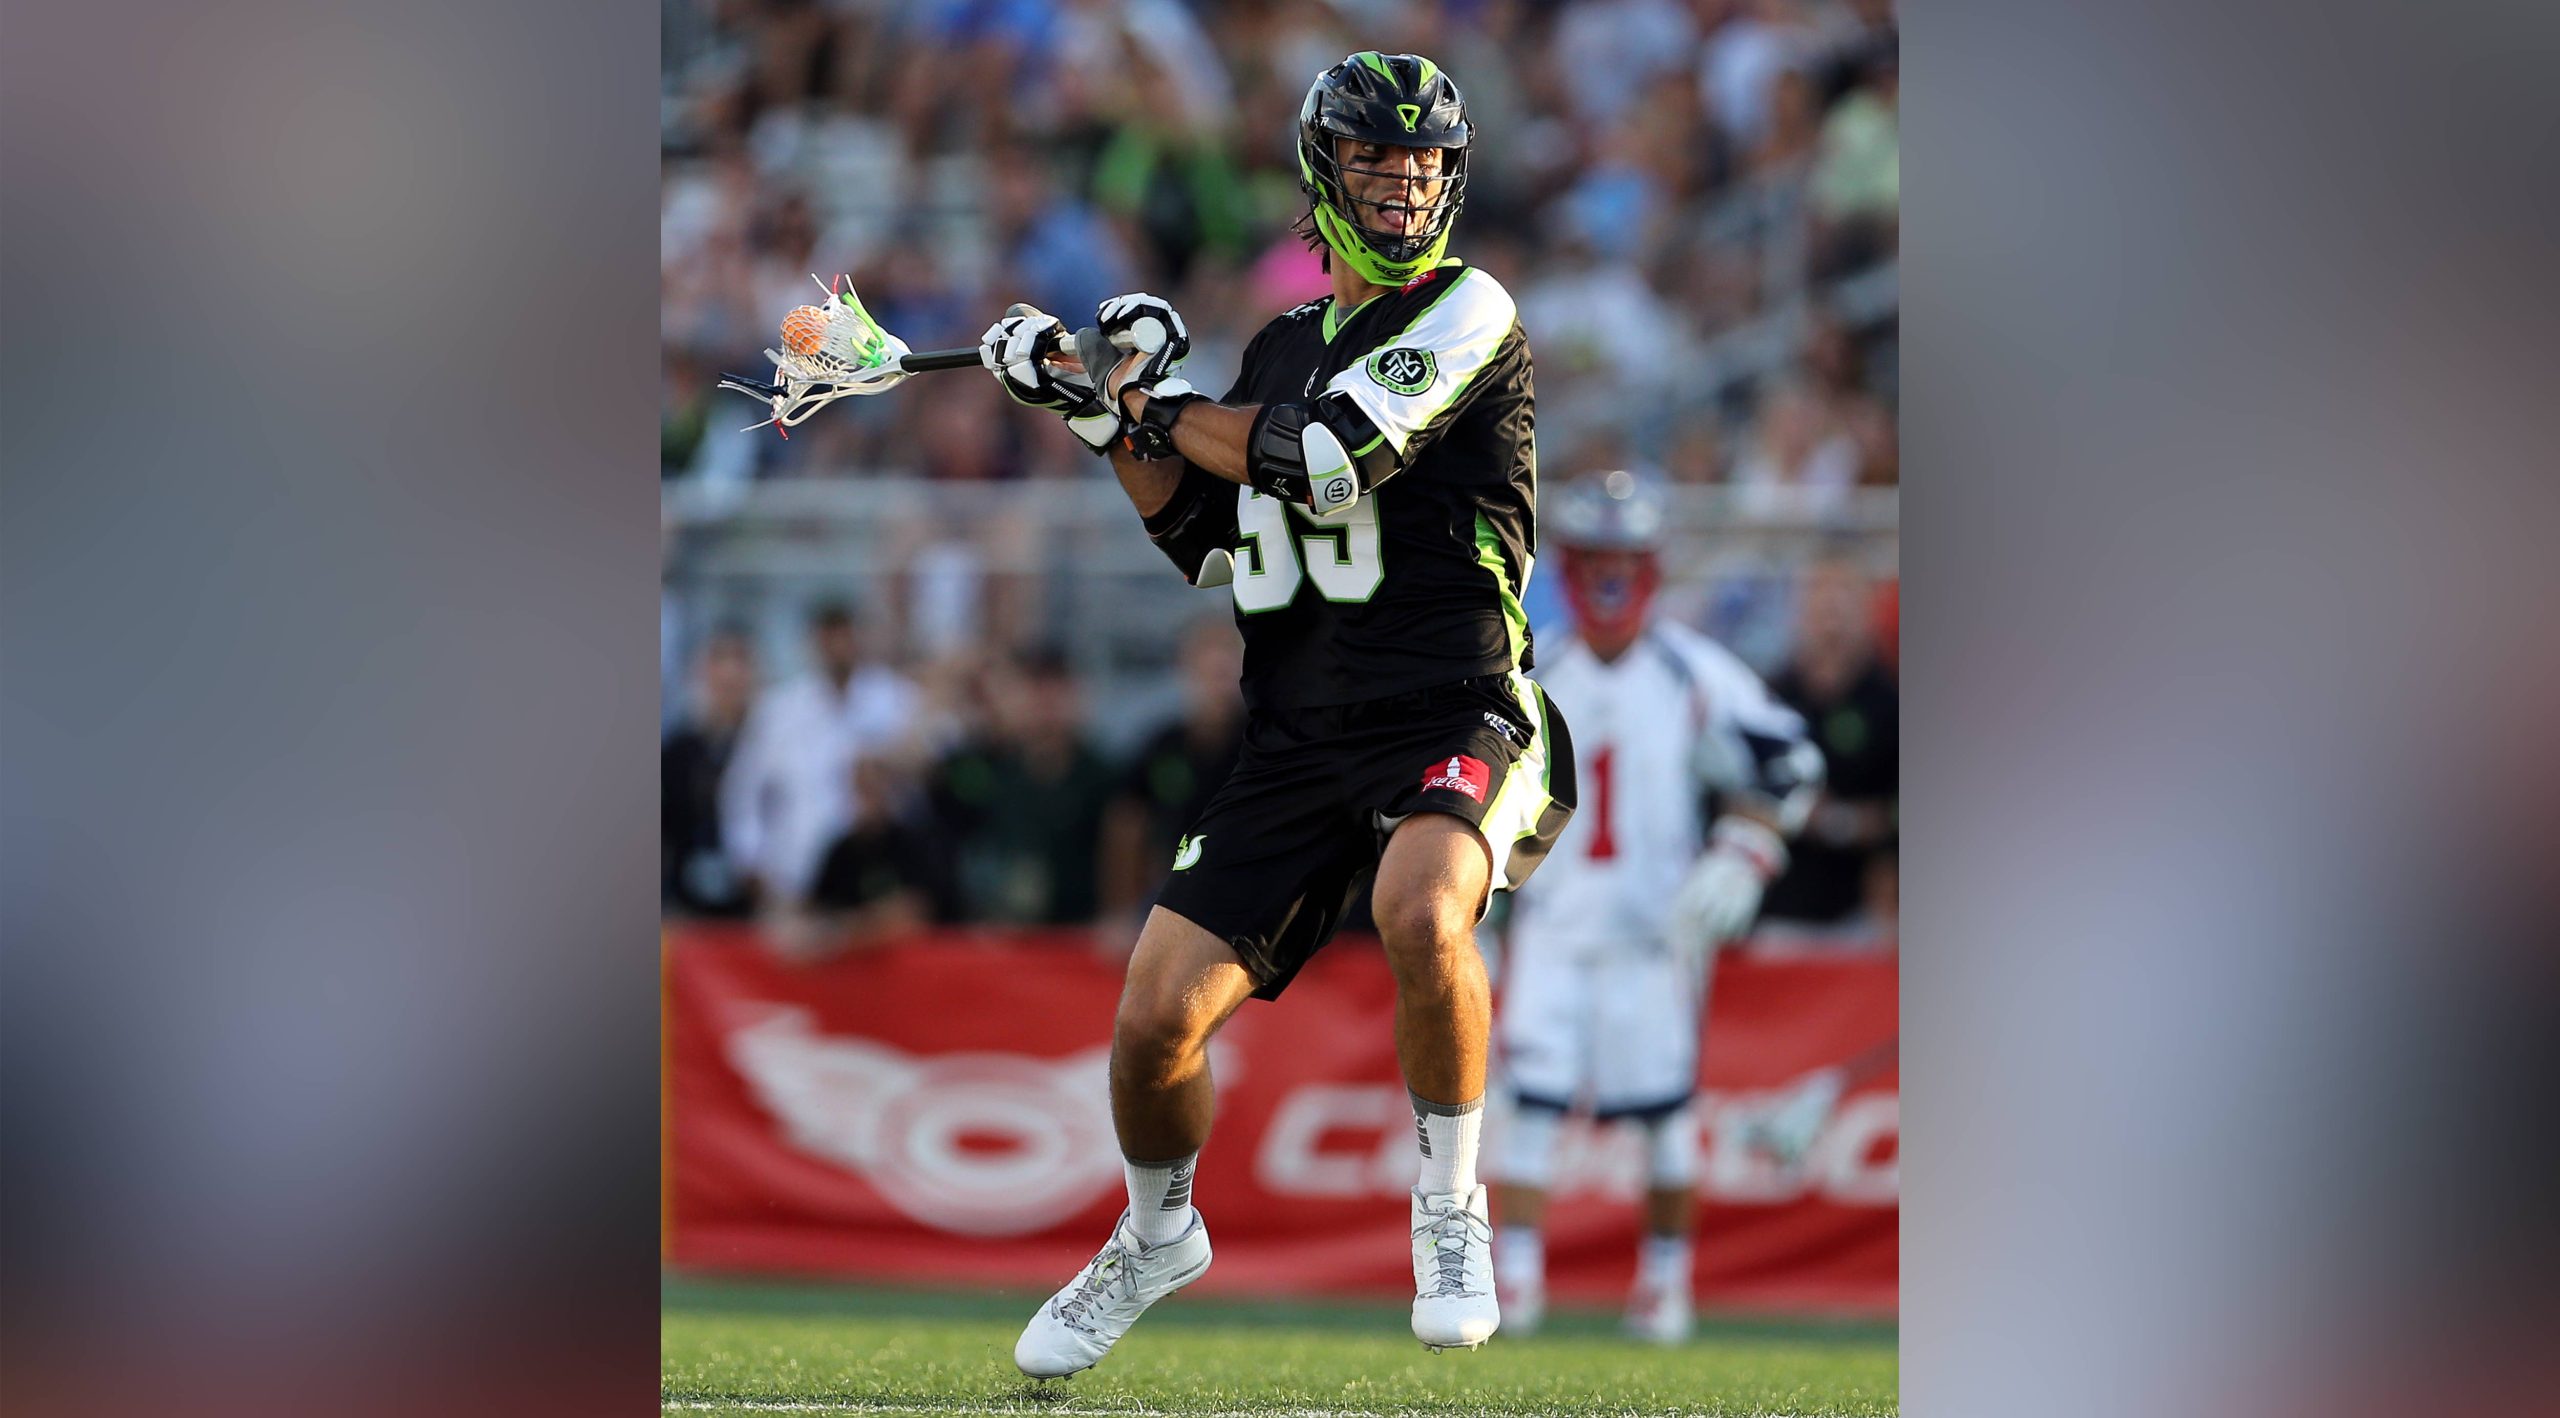 Lacrosse Champ Paul Rabil’s 3-Step Conditioning Workout